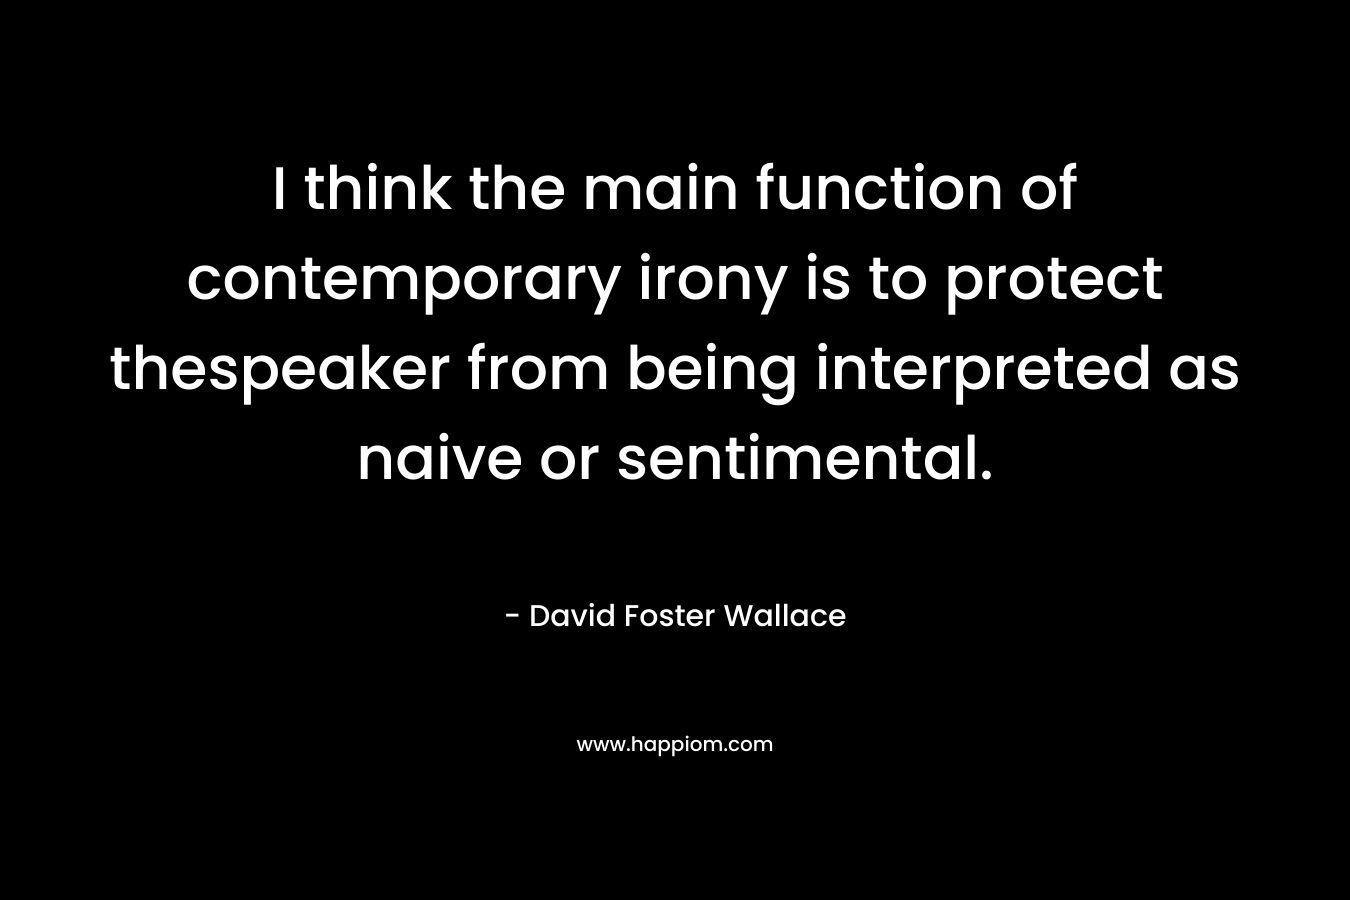 I think the main function of contemporary irony is to protect thespeaker from being interpreted as naive or sentimental.